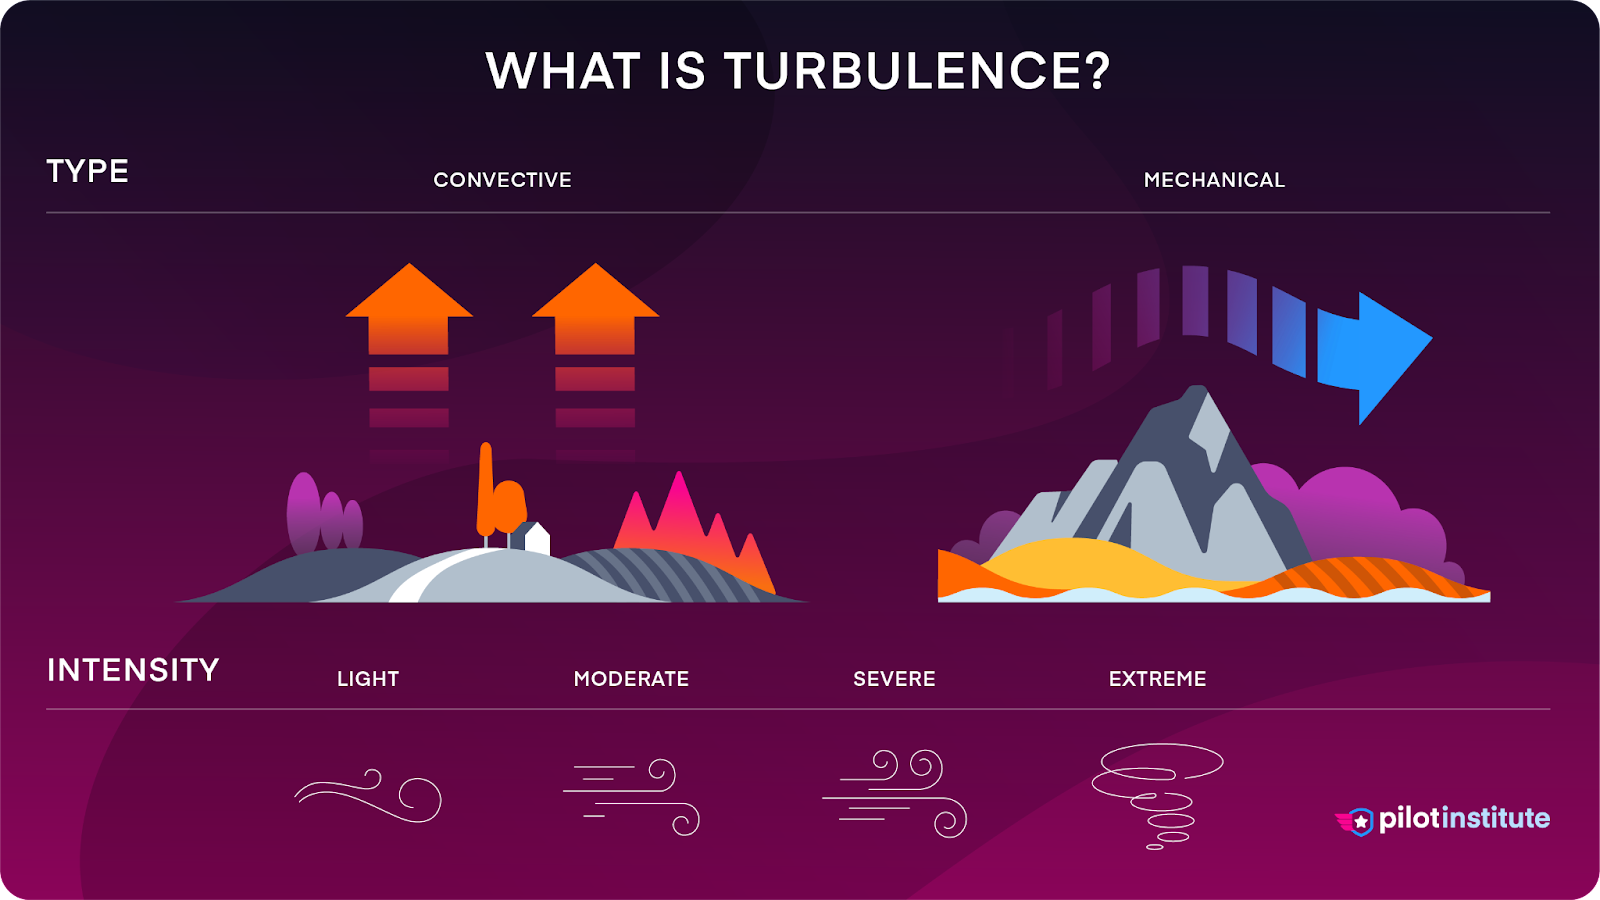 A diagram showing the types an intensity of turbulence.